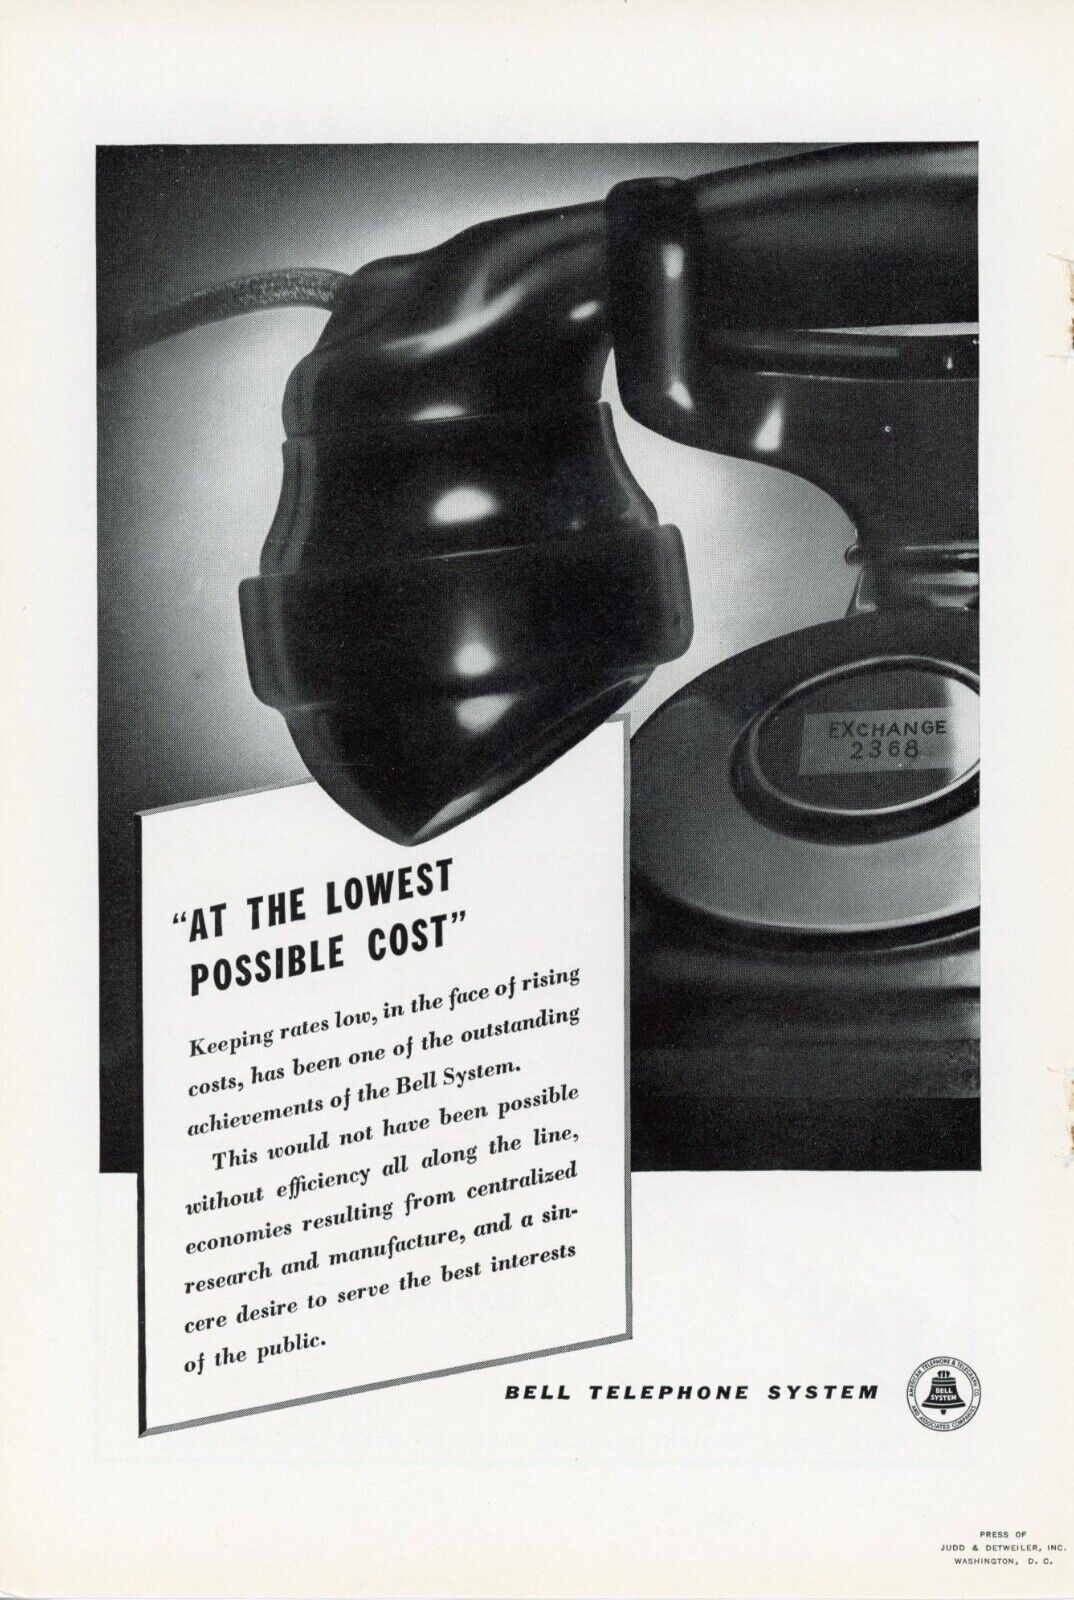 1940 Bell Telephone System Vintage Ads x4 Phones Lowest Cost Bargain